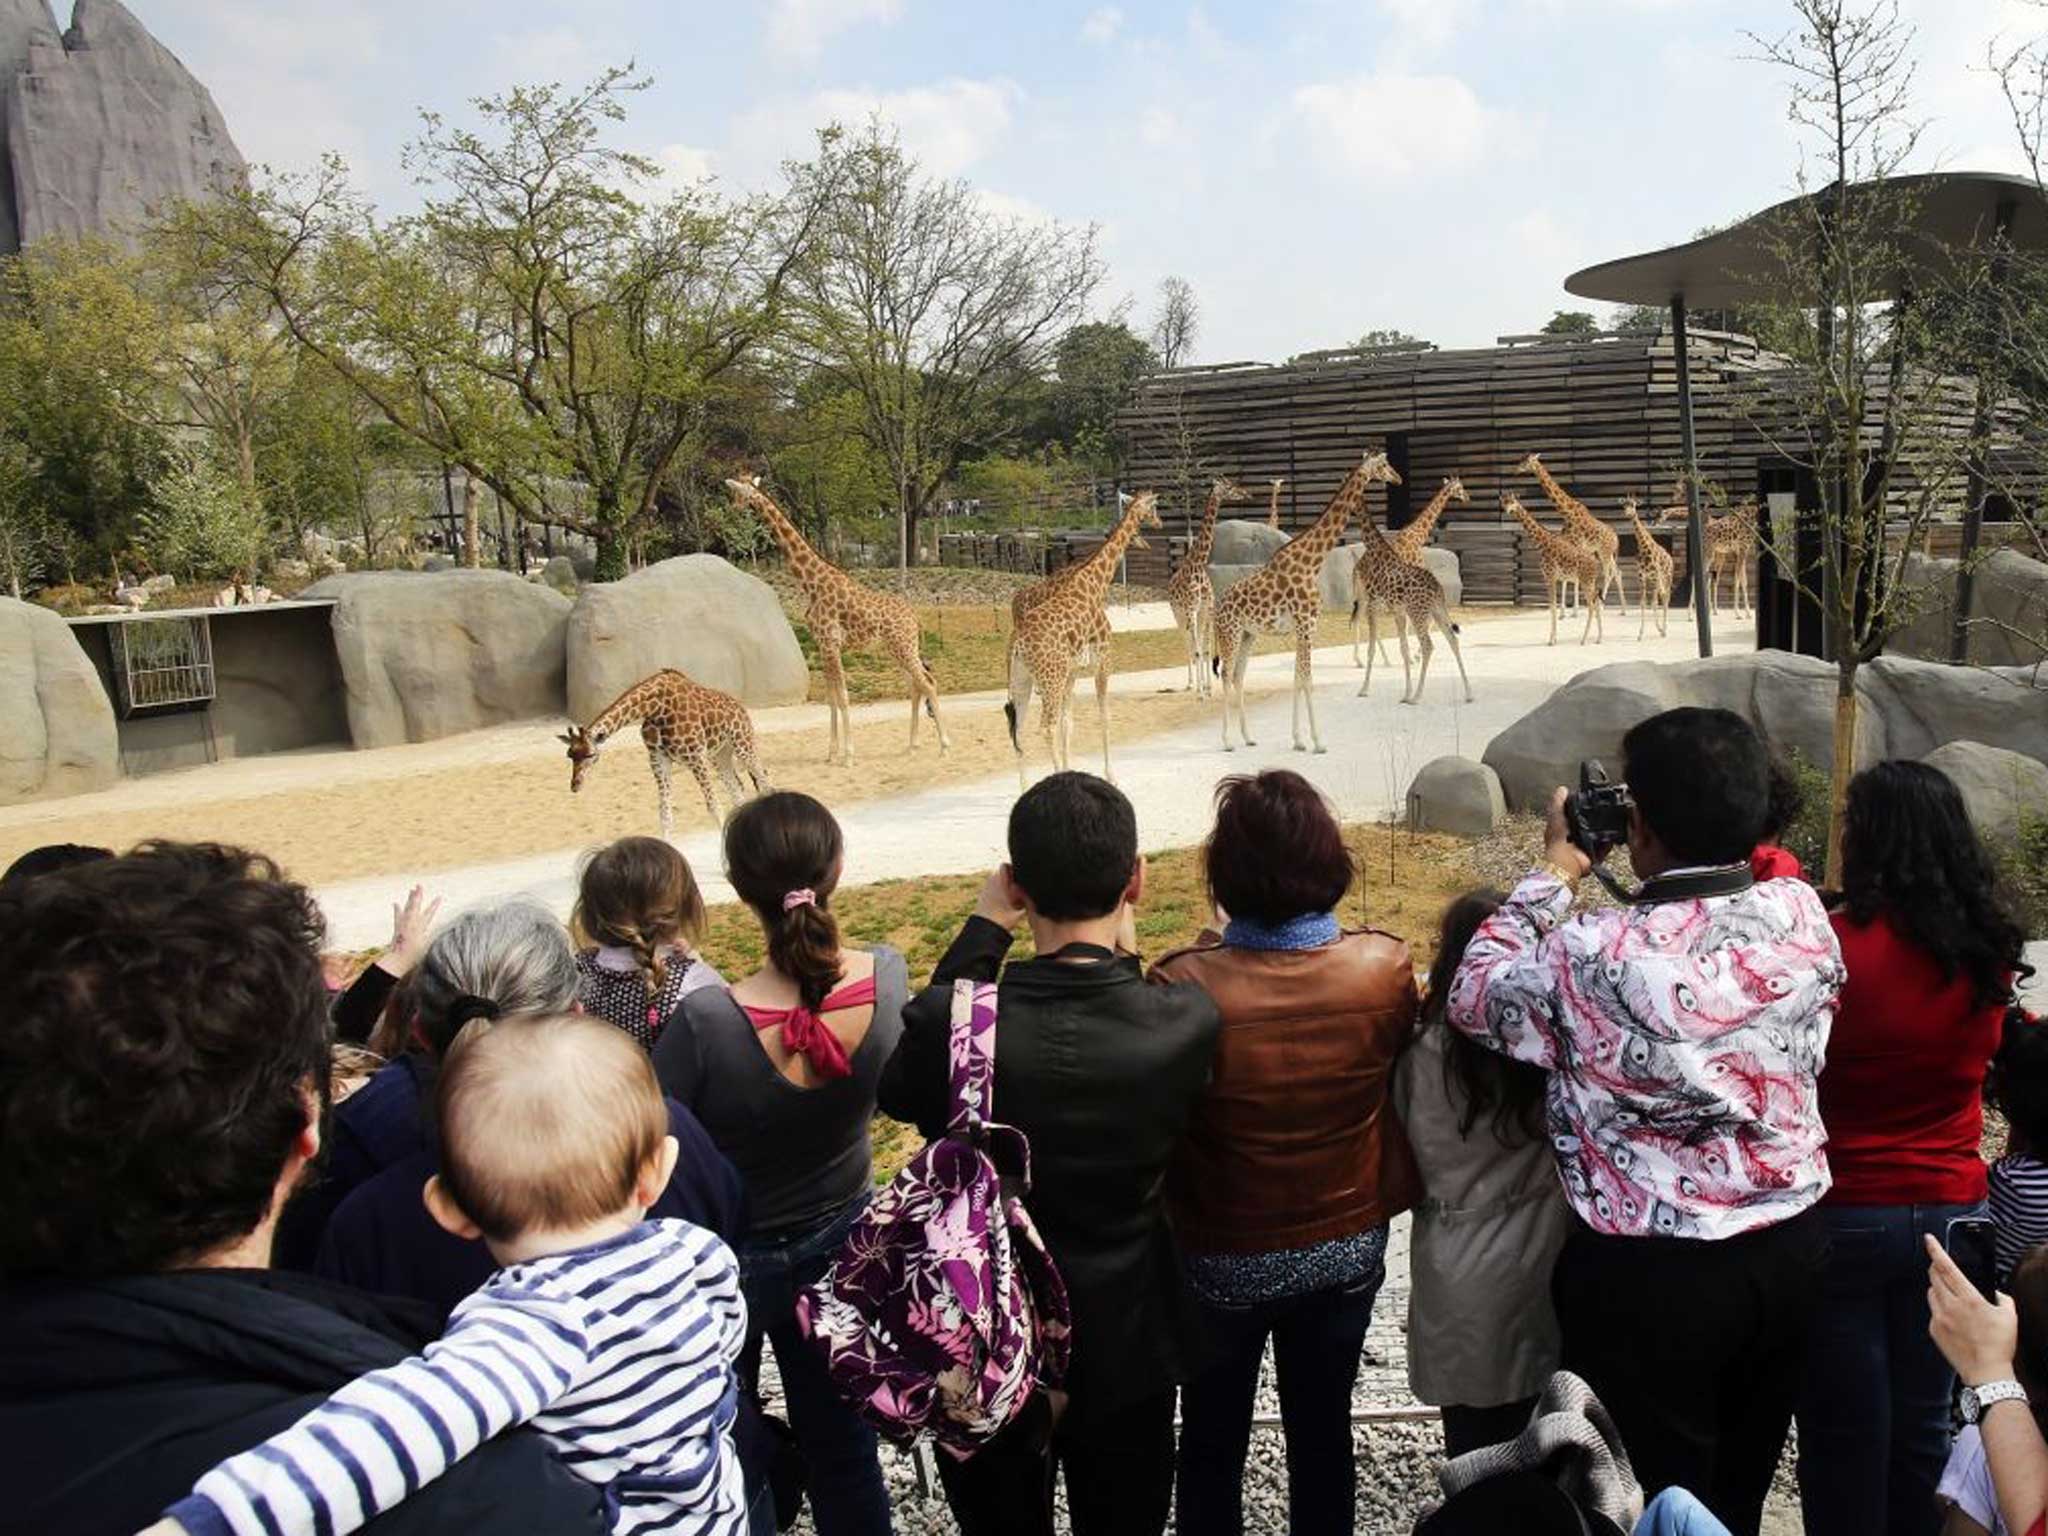 Groundbreaking design and new technology provide zoo animals with near-natural habitats